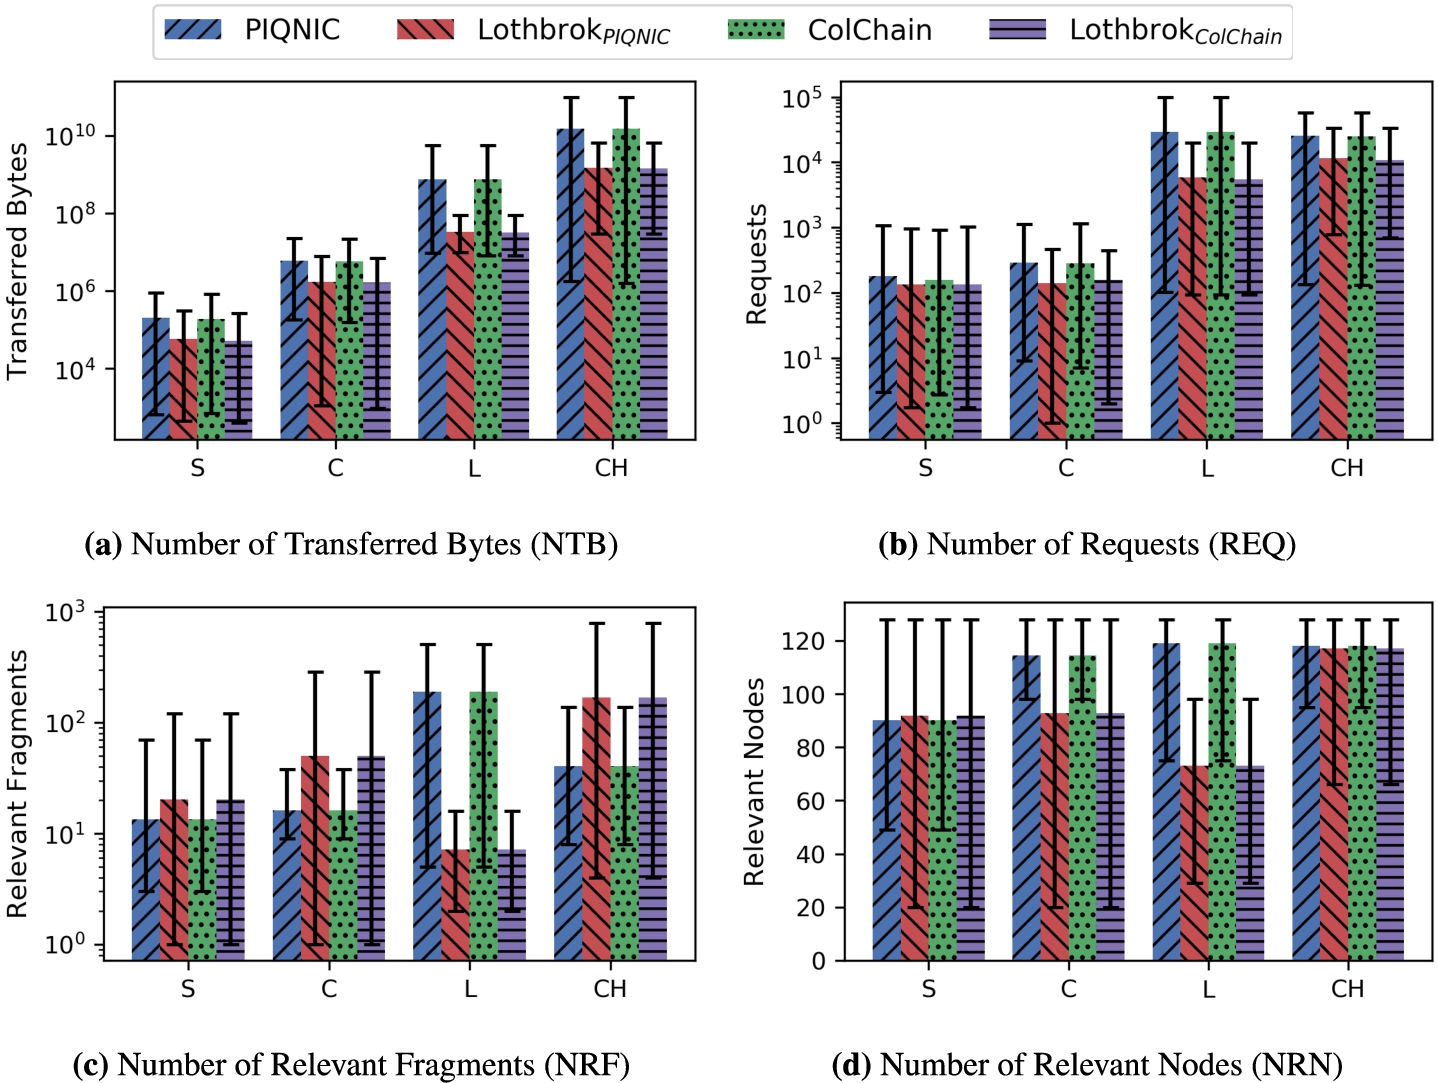 Number of transferred bytes (NTB) (a), number of requests (REQ) (b), number of relevant fragments (NRF) (c), and number of relevant nodes (NRN) (d) for each LargeRDFBench query load.